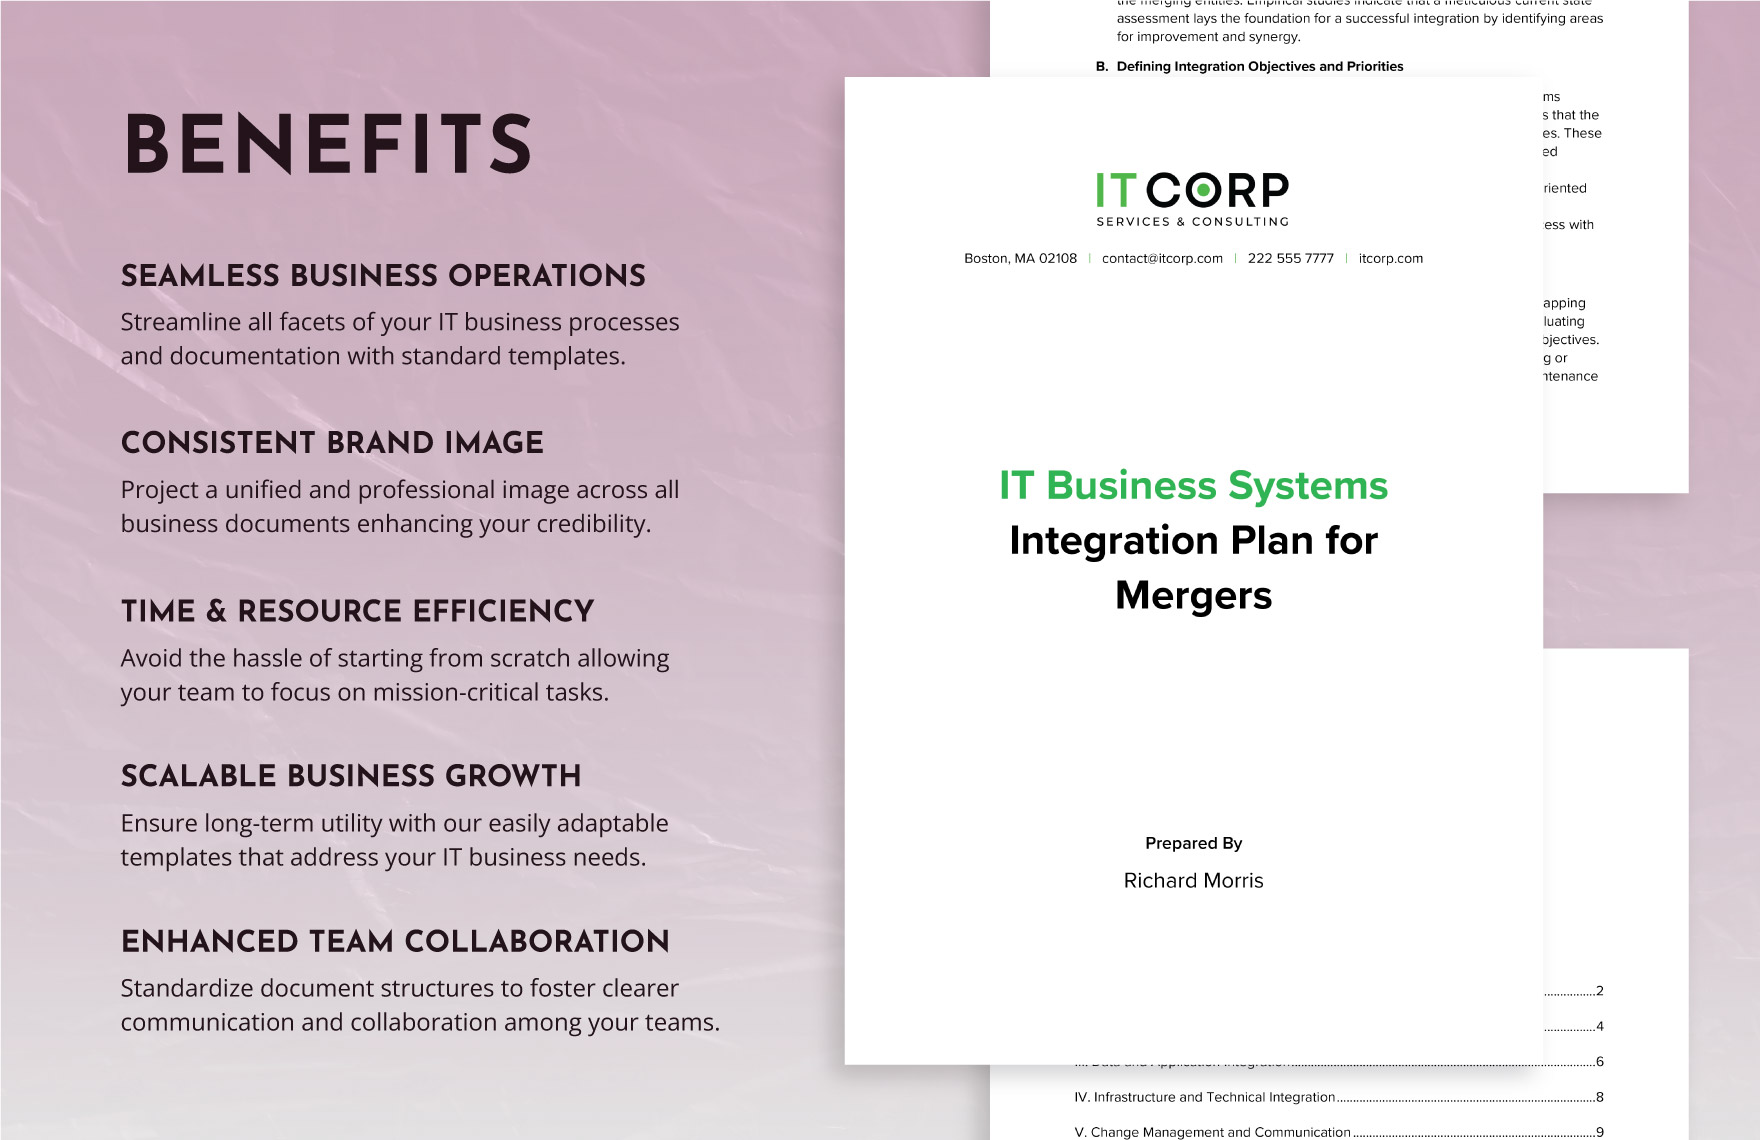 IT Business Systems Integration Plan for Mergers Template